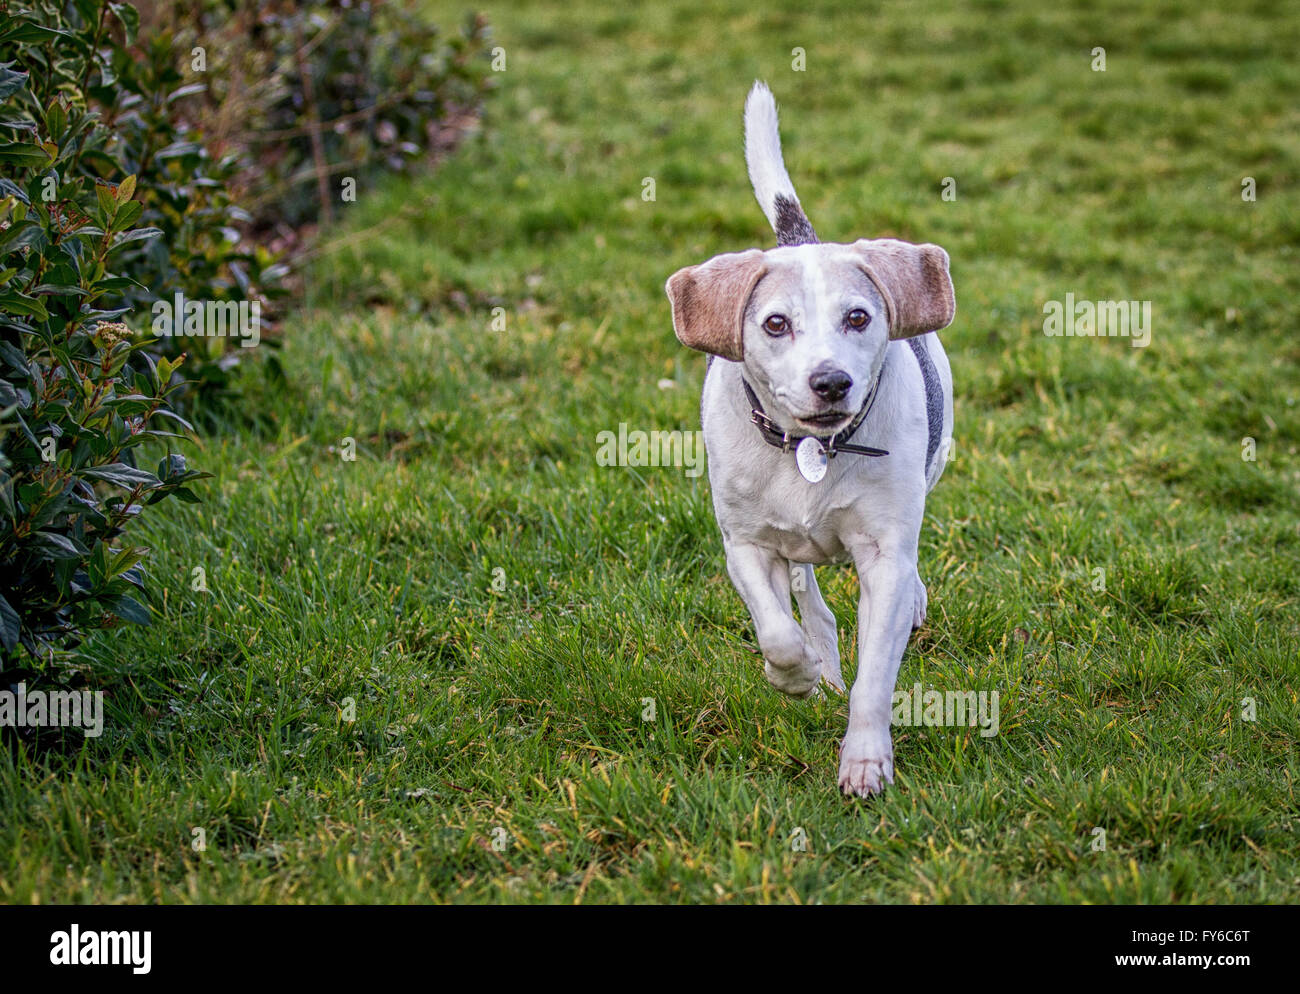 Male beagle dog wearing a collar and id tag running towards the camera in a garden with his tail up in the air. Stock Photo